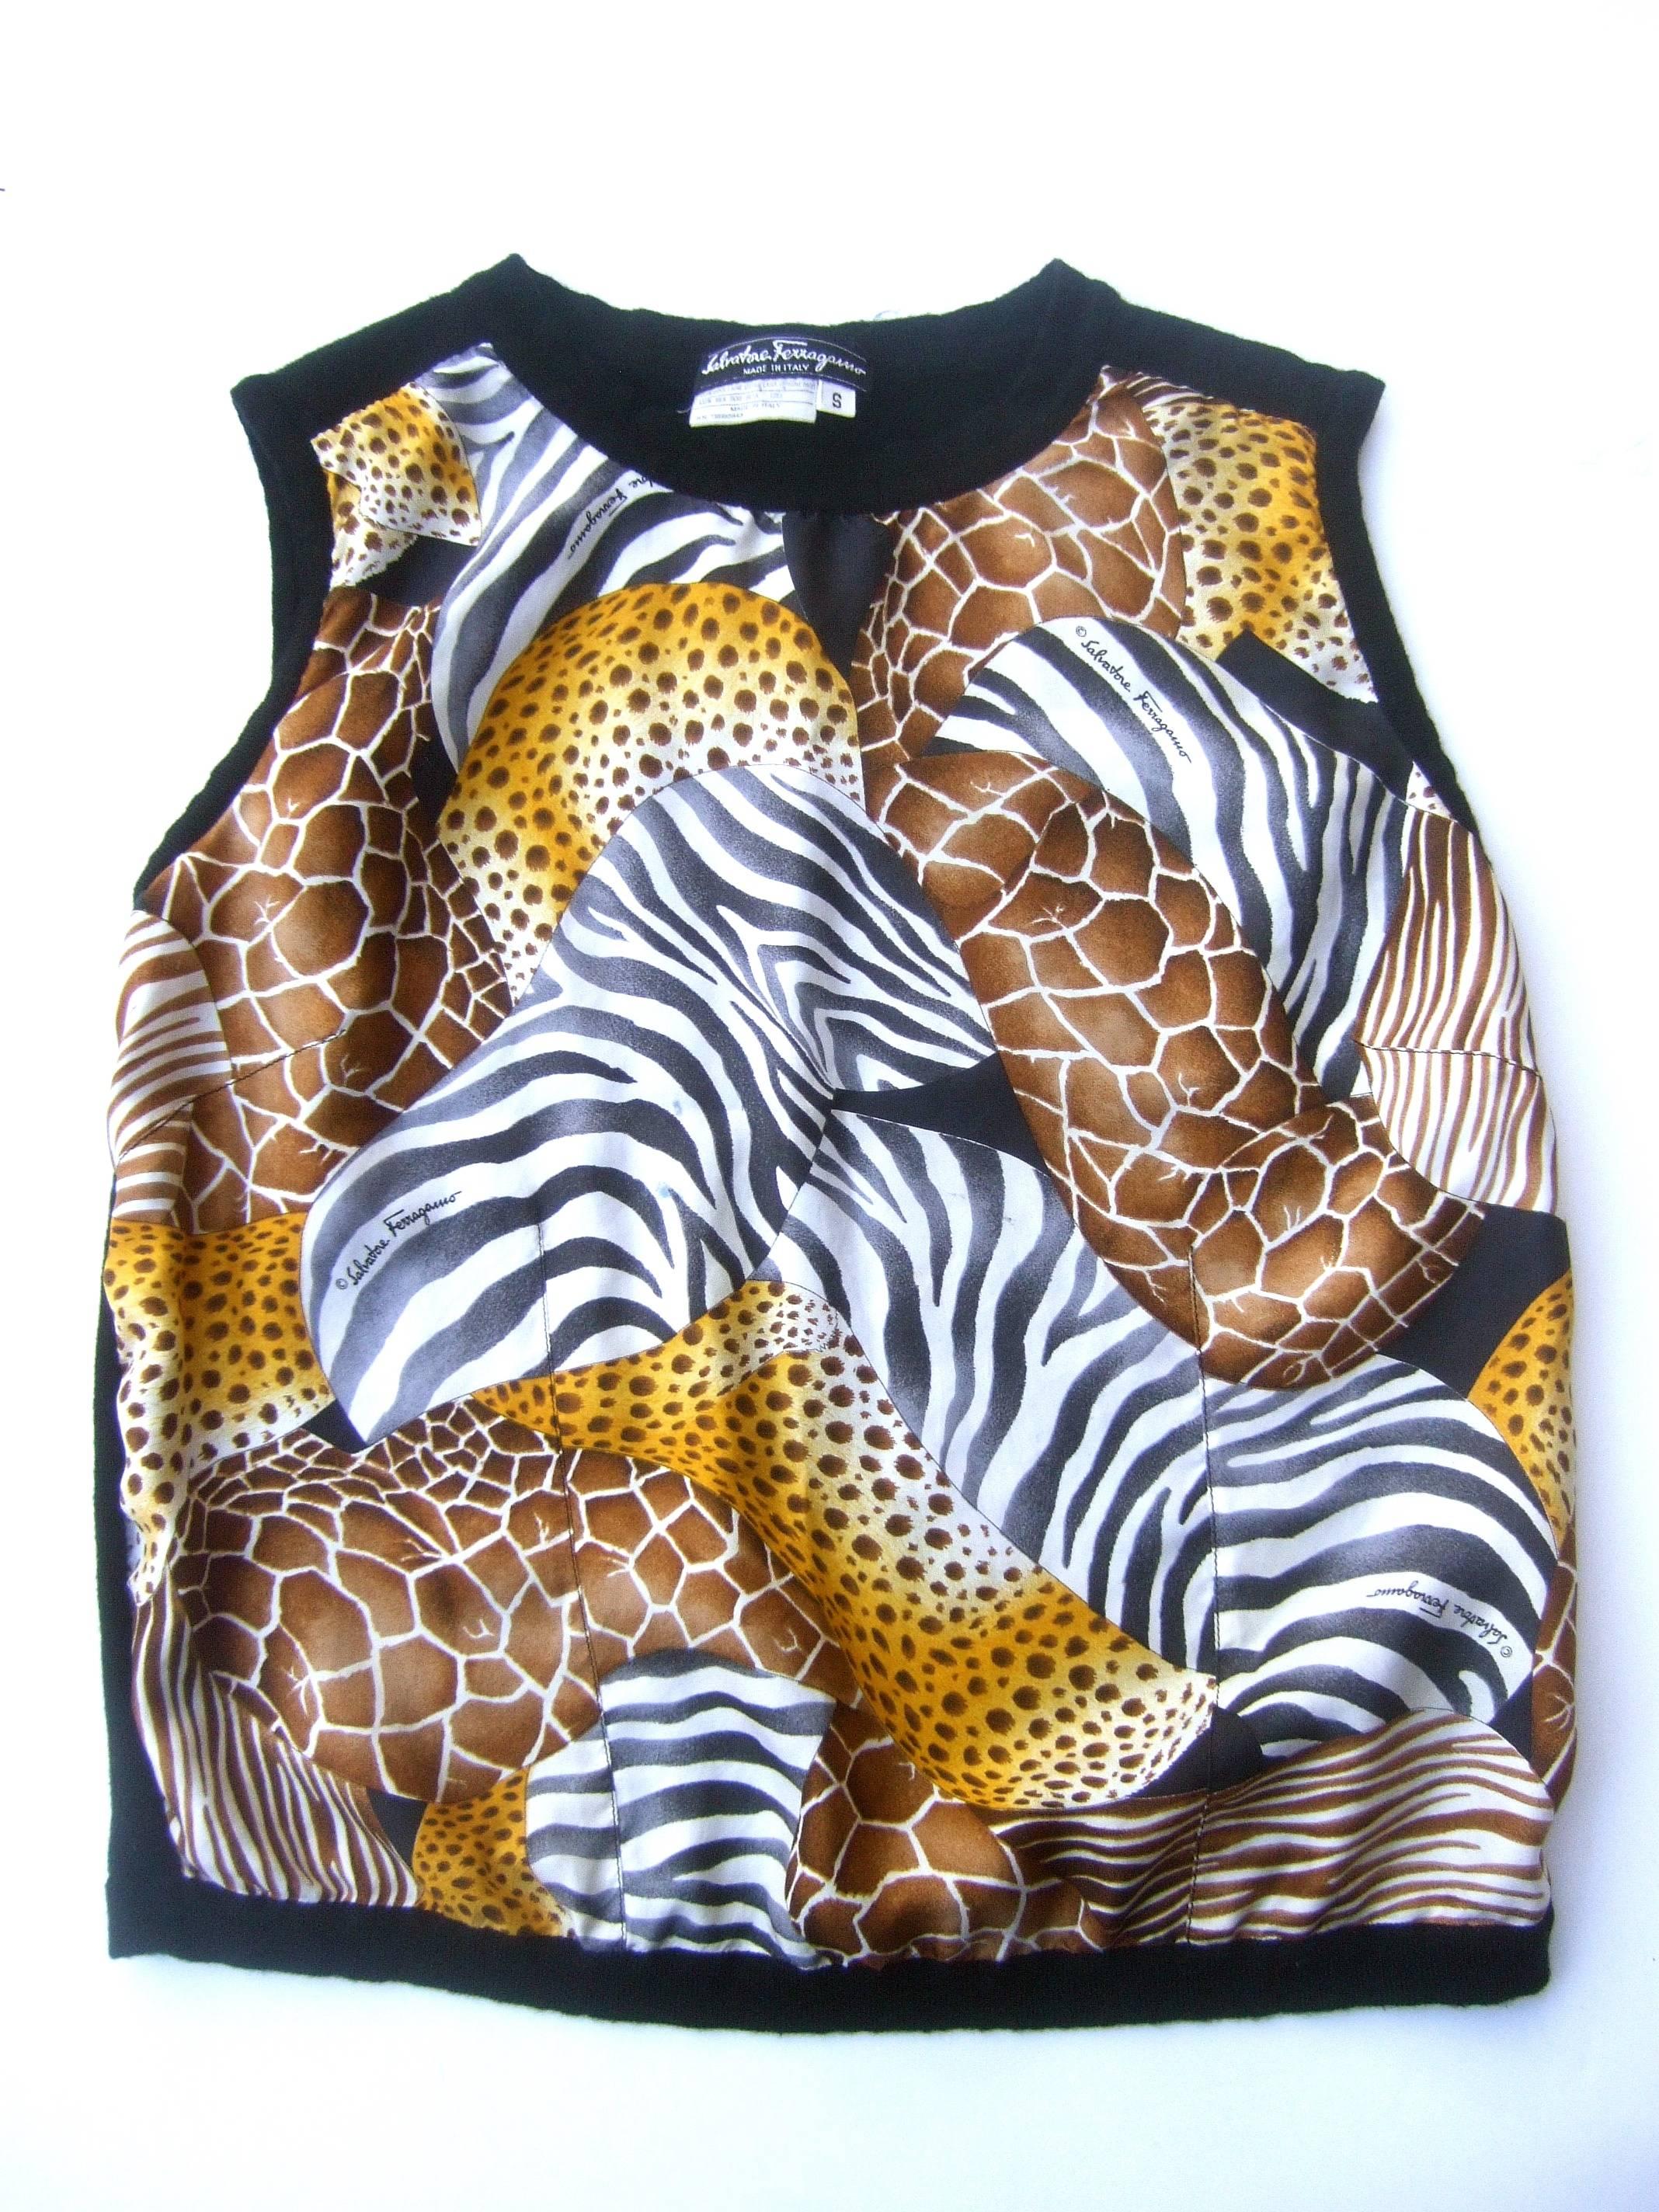 Salvatore Ferragamo exotic jungle print silk & wool shell 
The stylish Italian top is illustrated with vibrant silk animal
prints; zebra, tiger & alligator hides on the front side

Ferragamo's script signature is concealed 
within the jungle